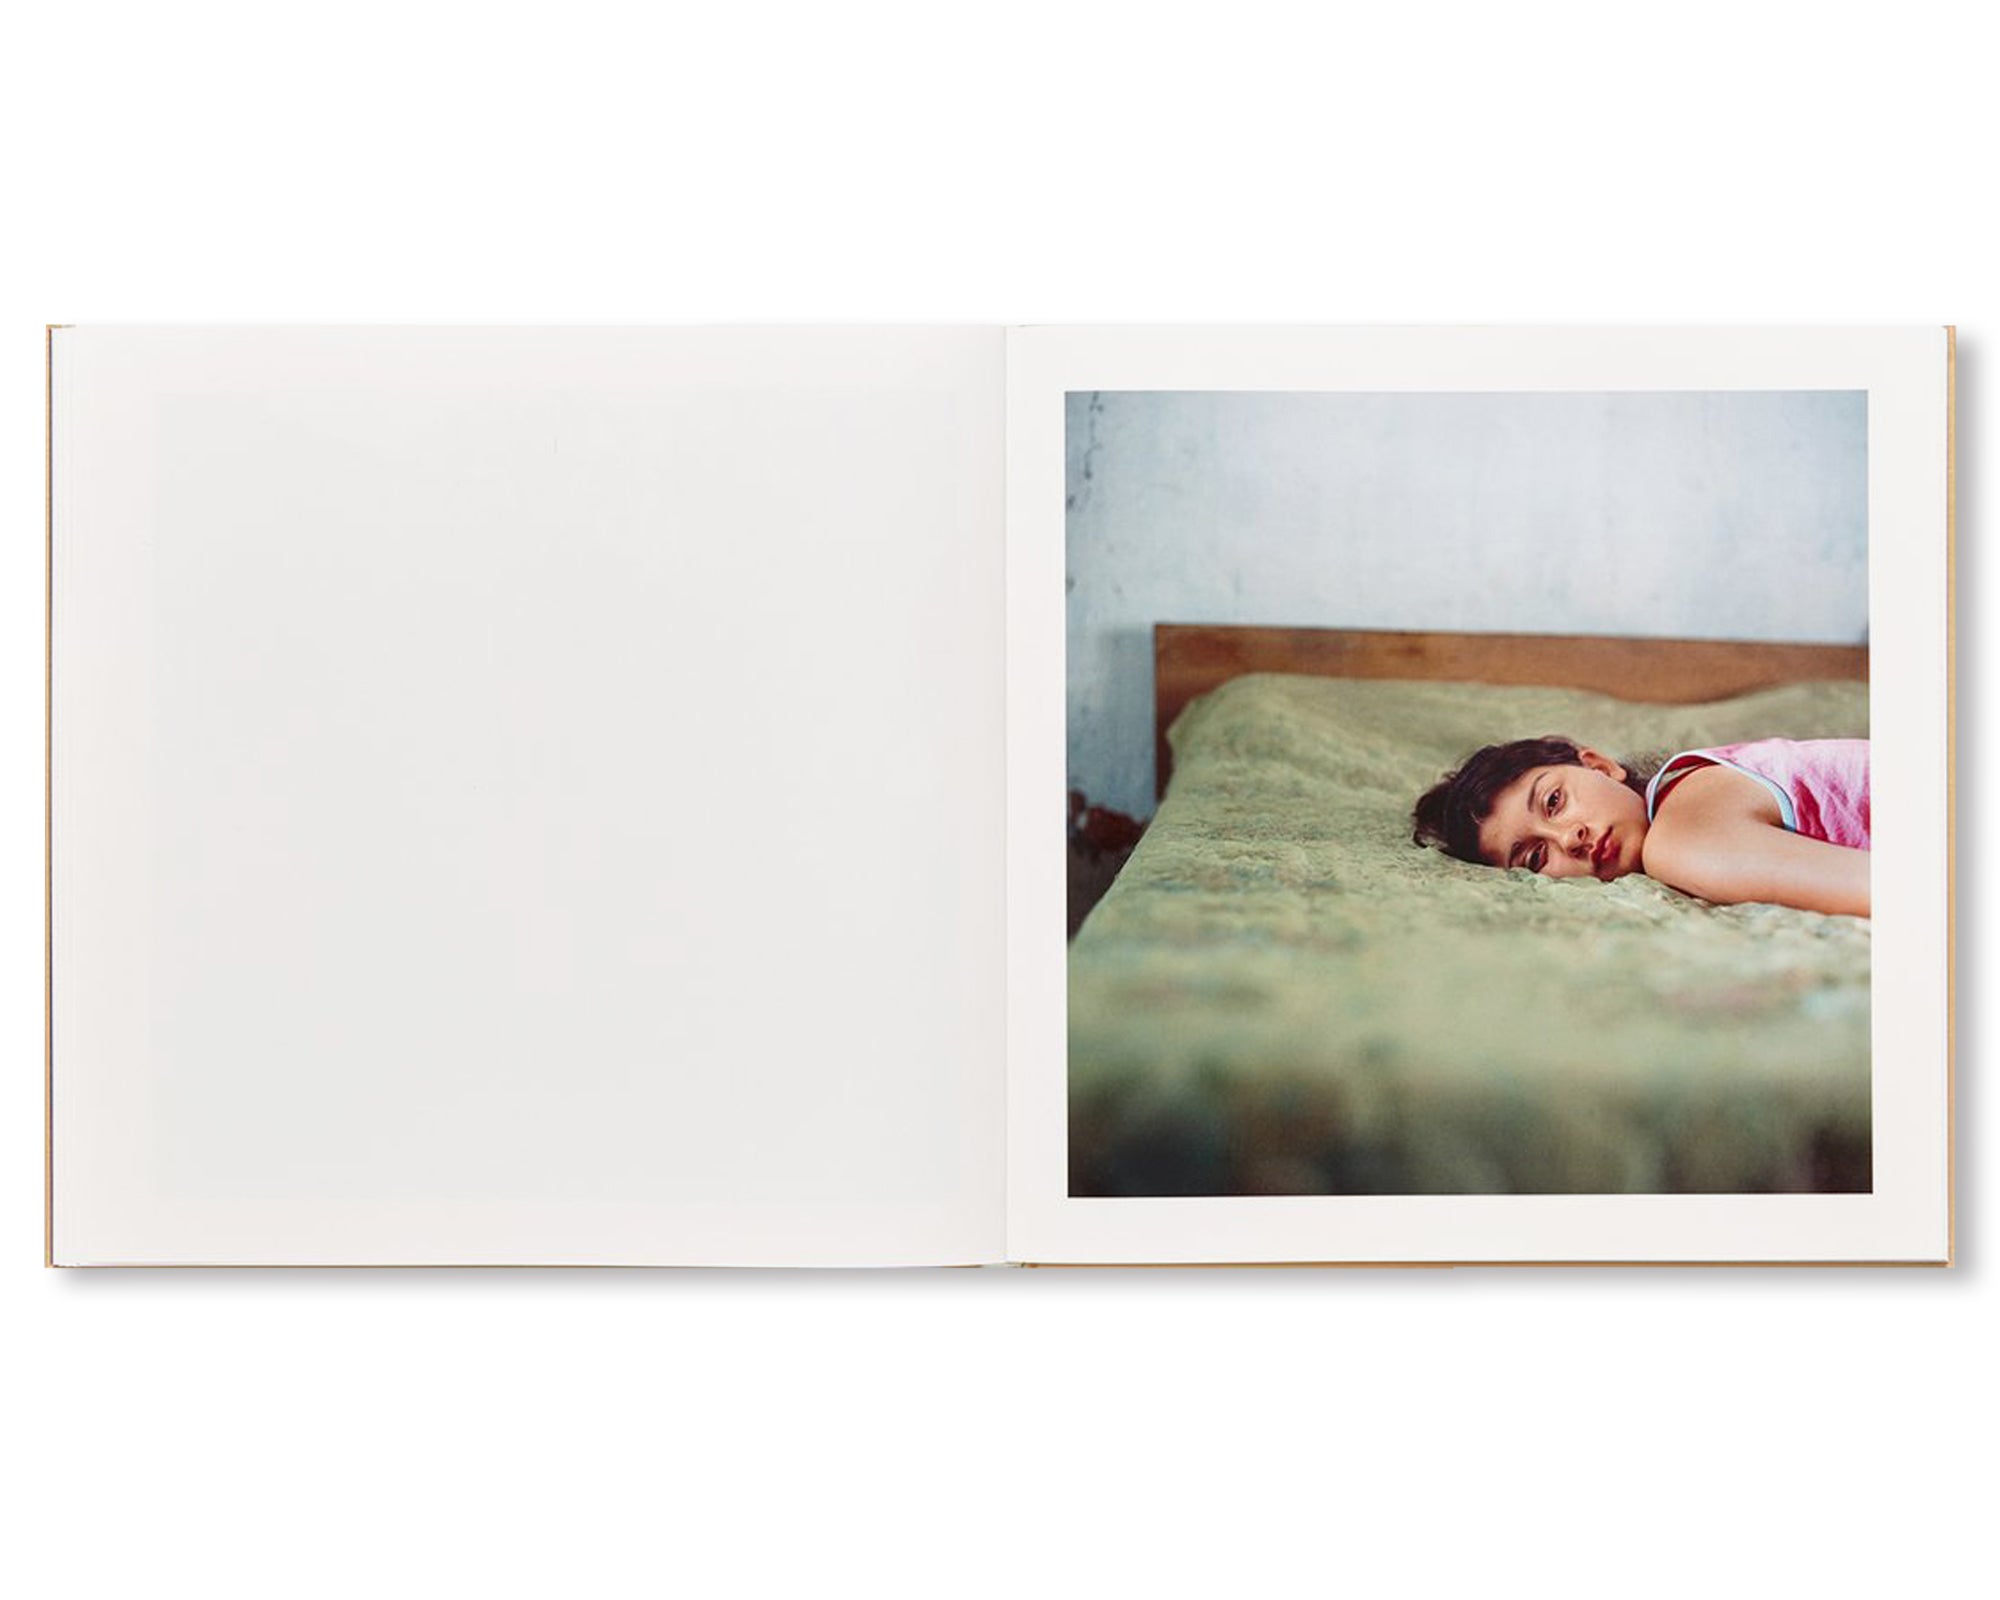 THE ADVENTURES OF GUILLE AND BELINDA AND THE ILLUSION OF AN EVERLASTING SUMMER by Alessandra Sanguinetti [SIGNED PLATE]